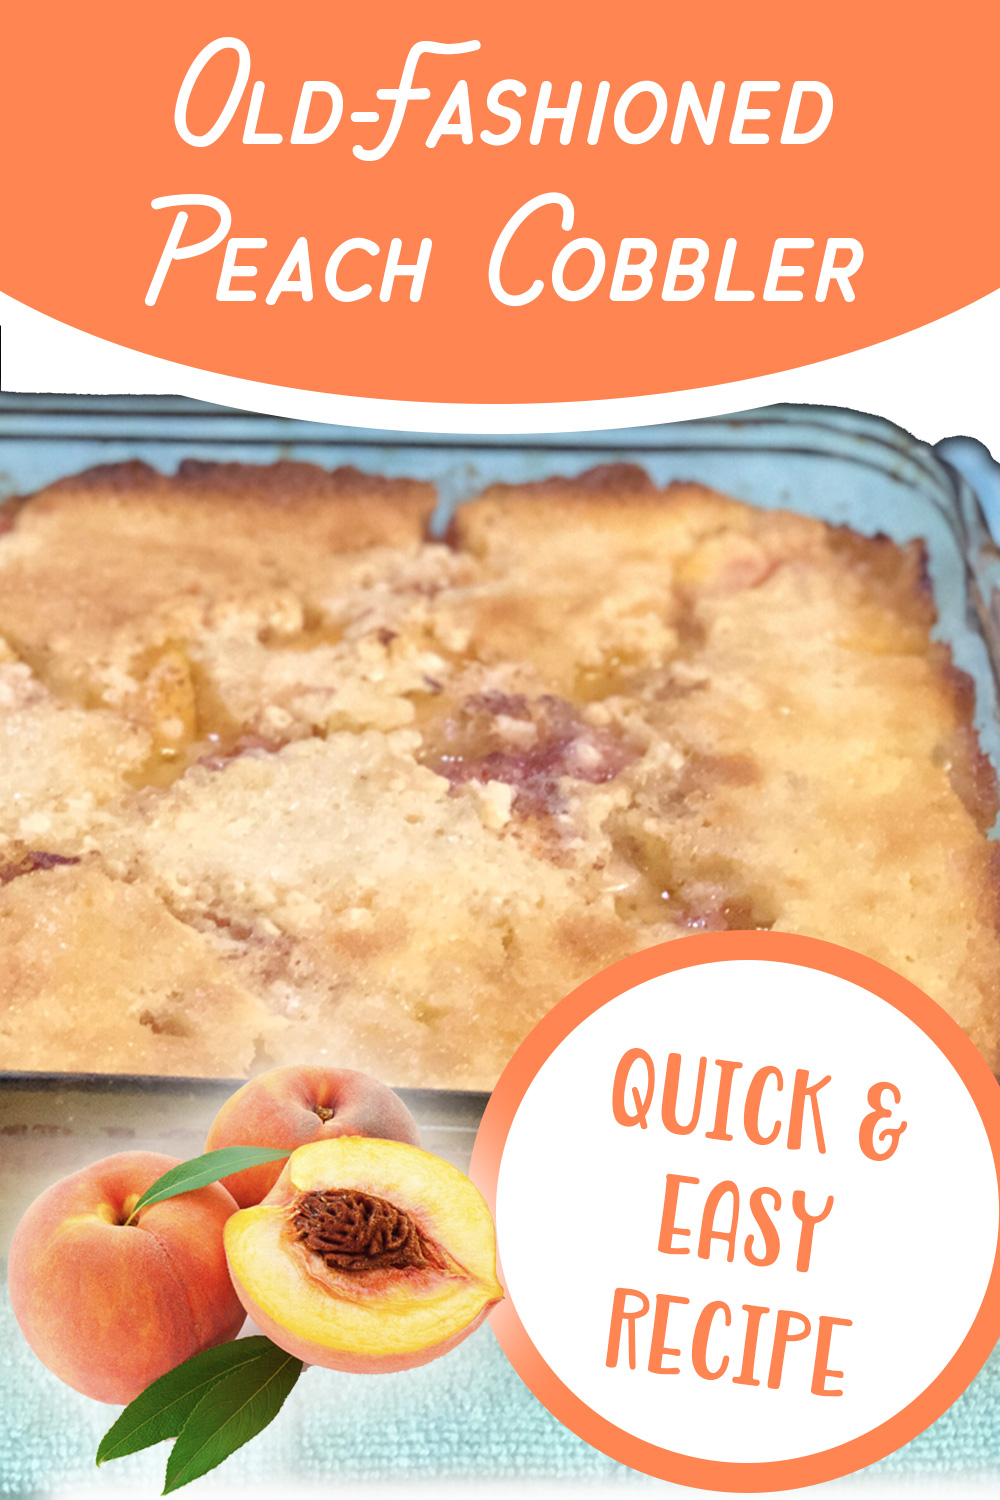 How to Make Old-Fashioned Peach Cobbler